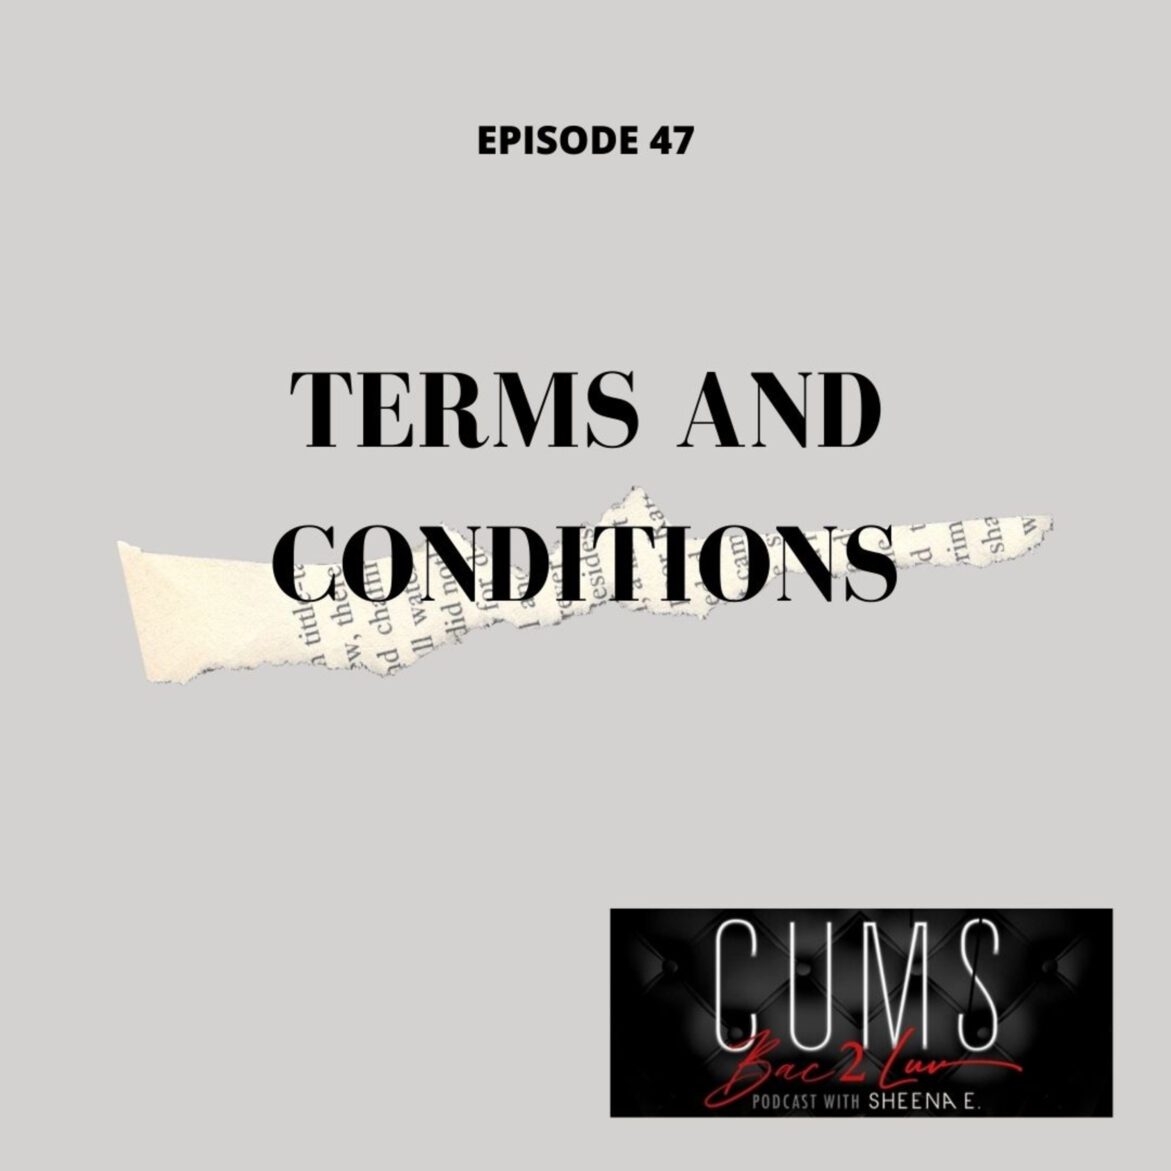 Black Podcasting - Terms And Conditions